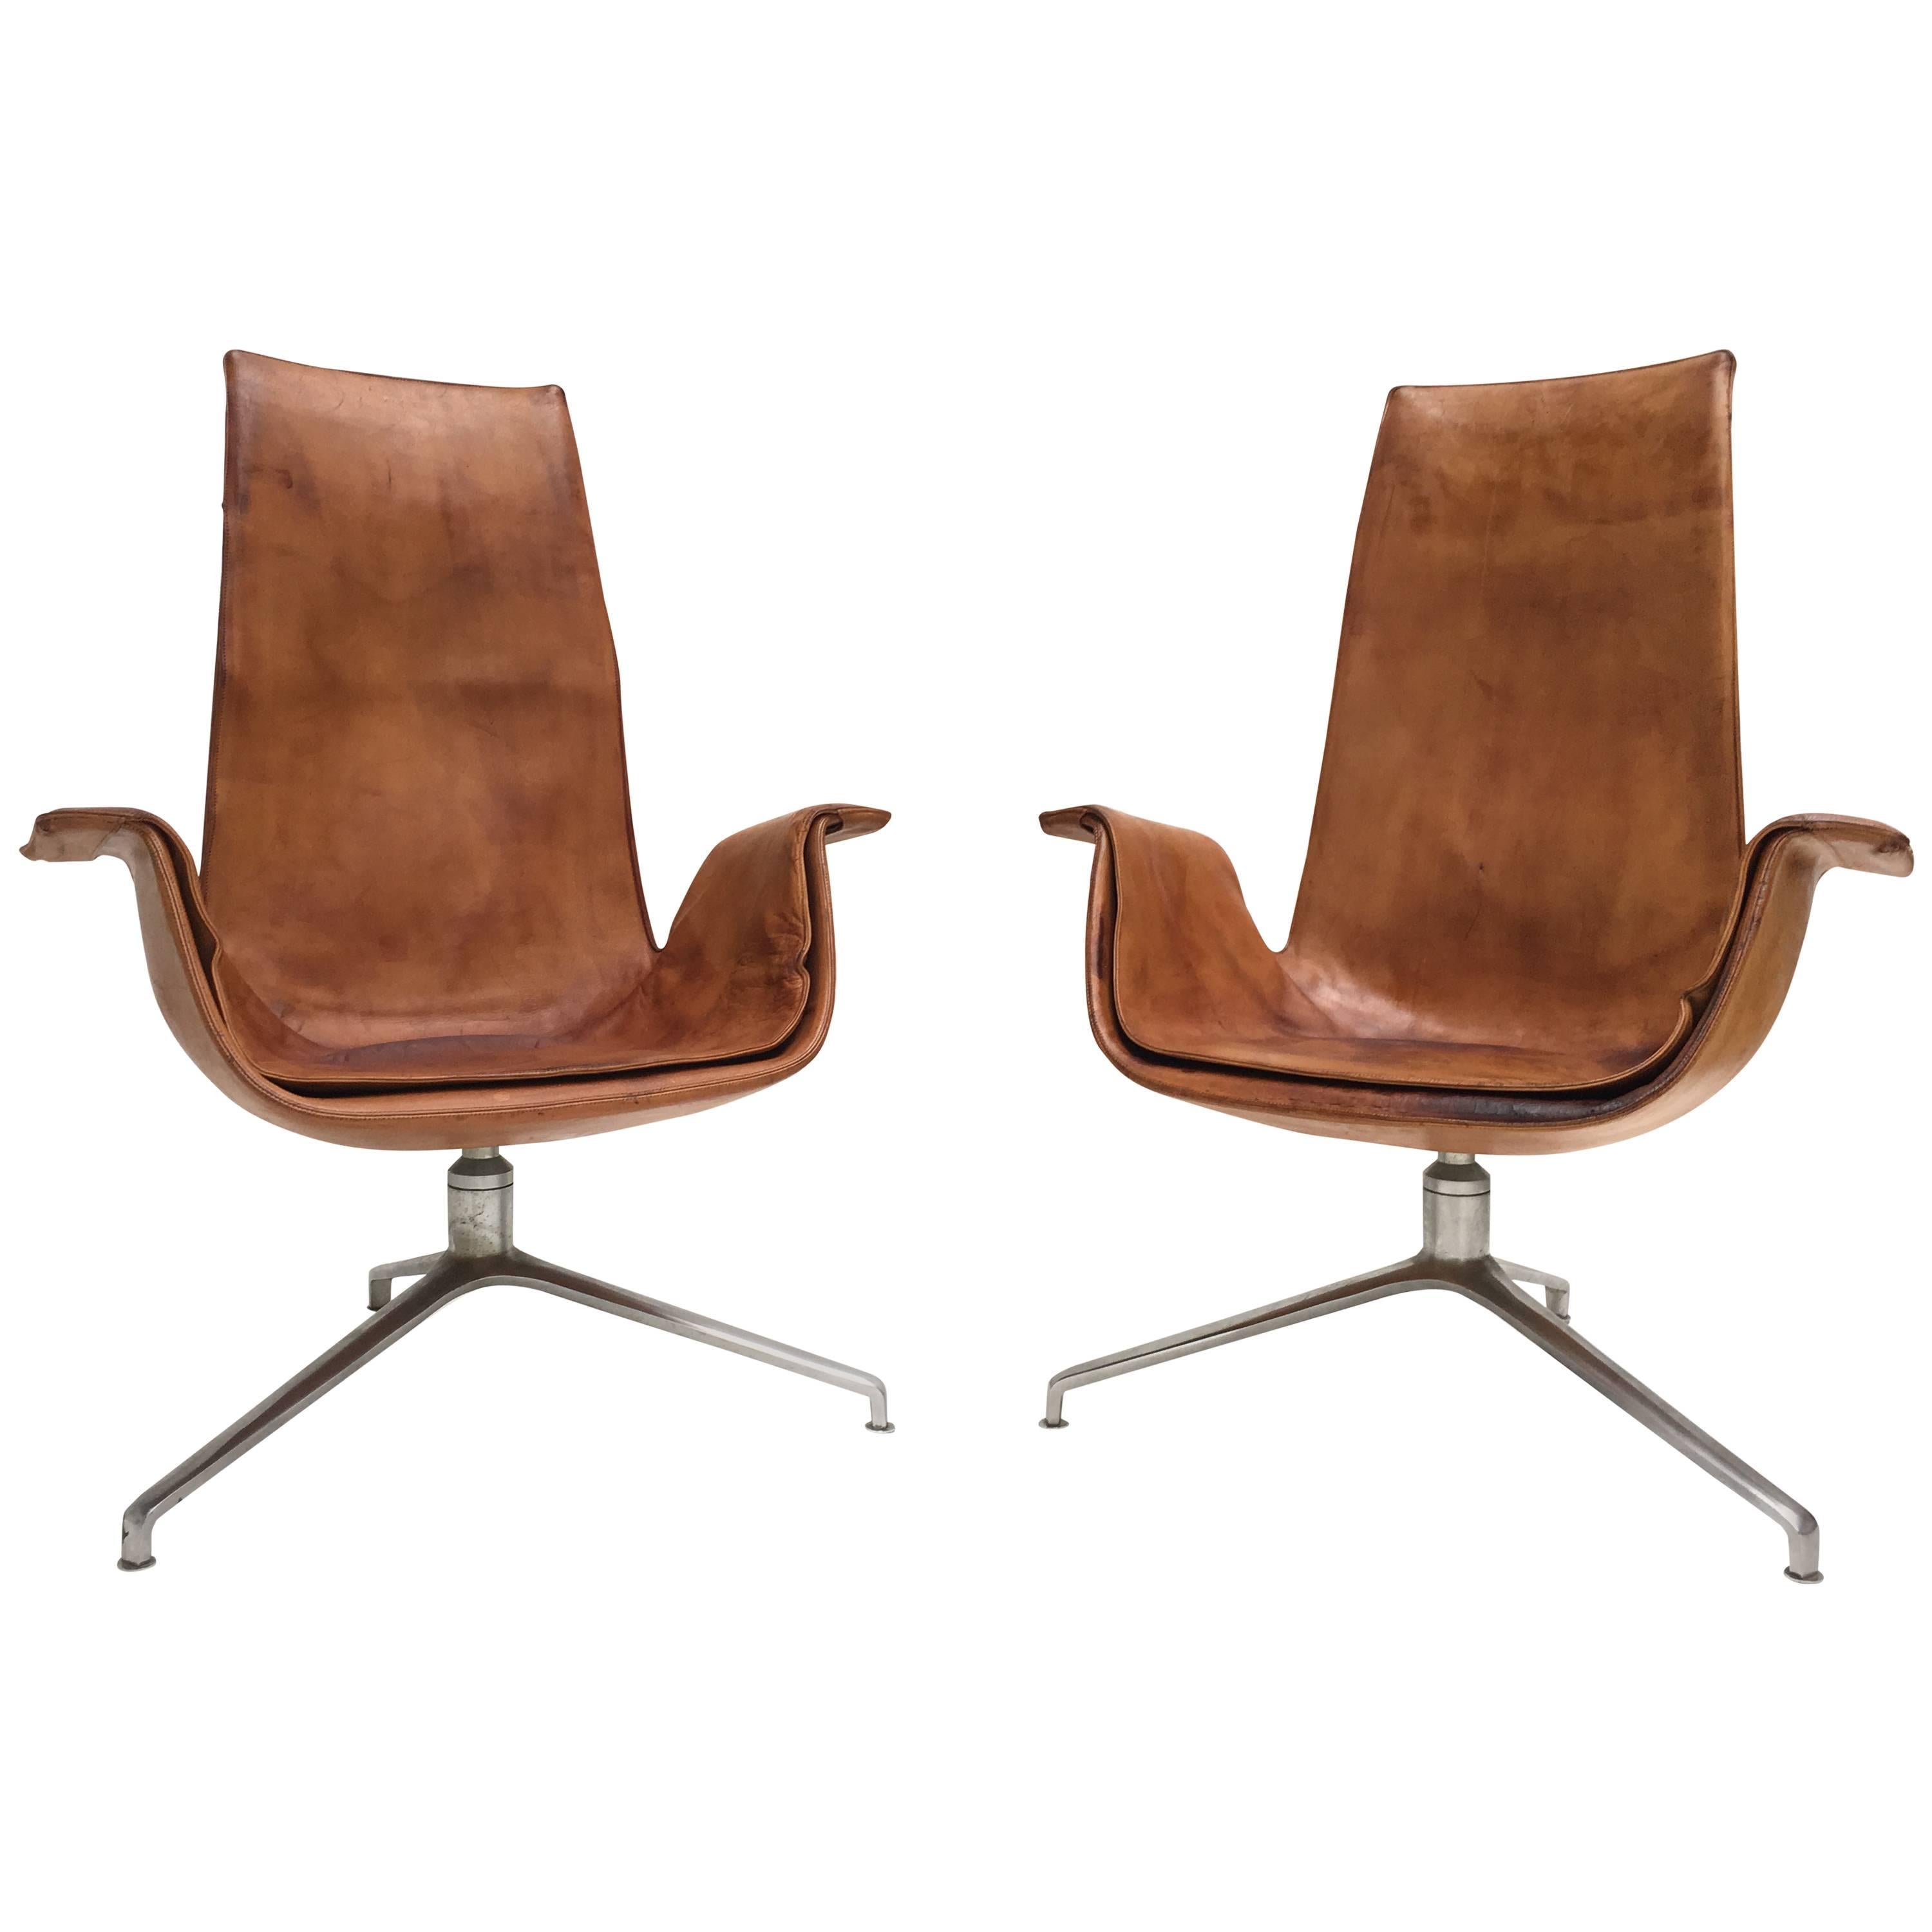 FK 6725 Tulip Chairs by Preben Fabricius & Jørgen Kastholm for Alfred Kill, 1964 For Sale